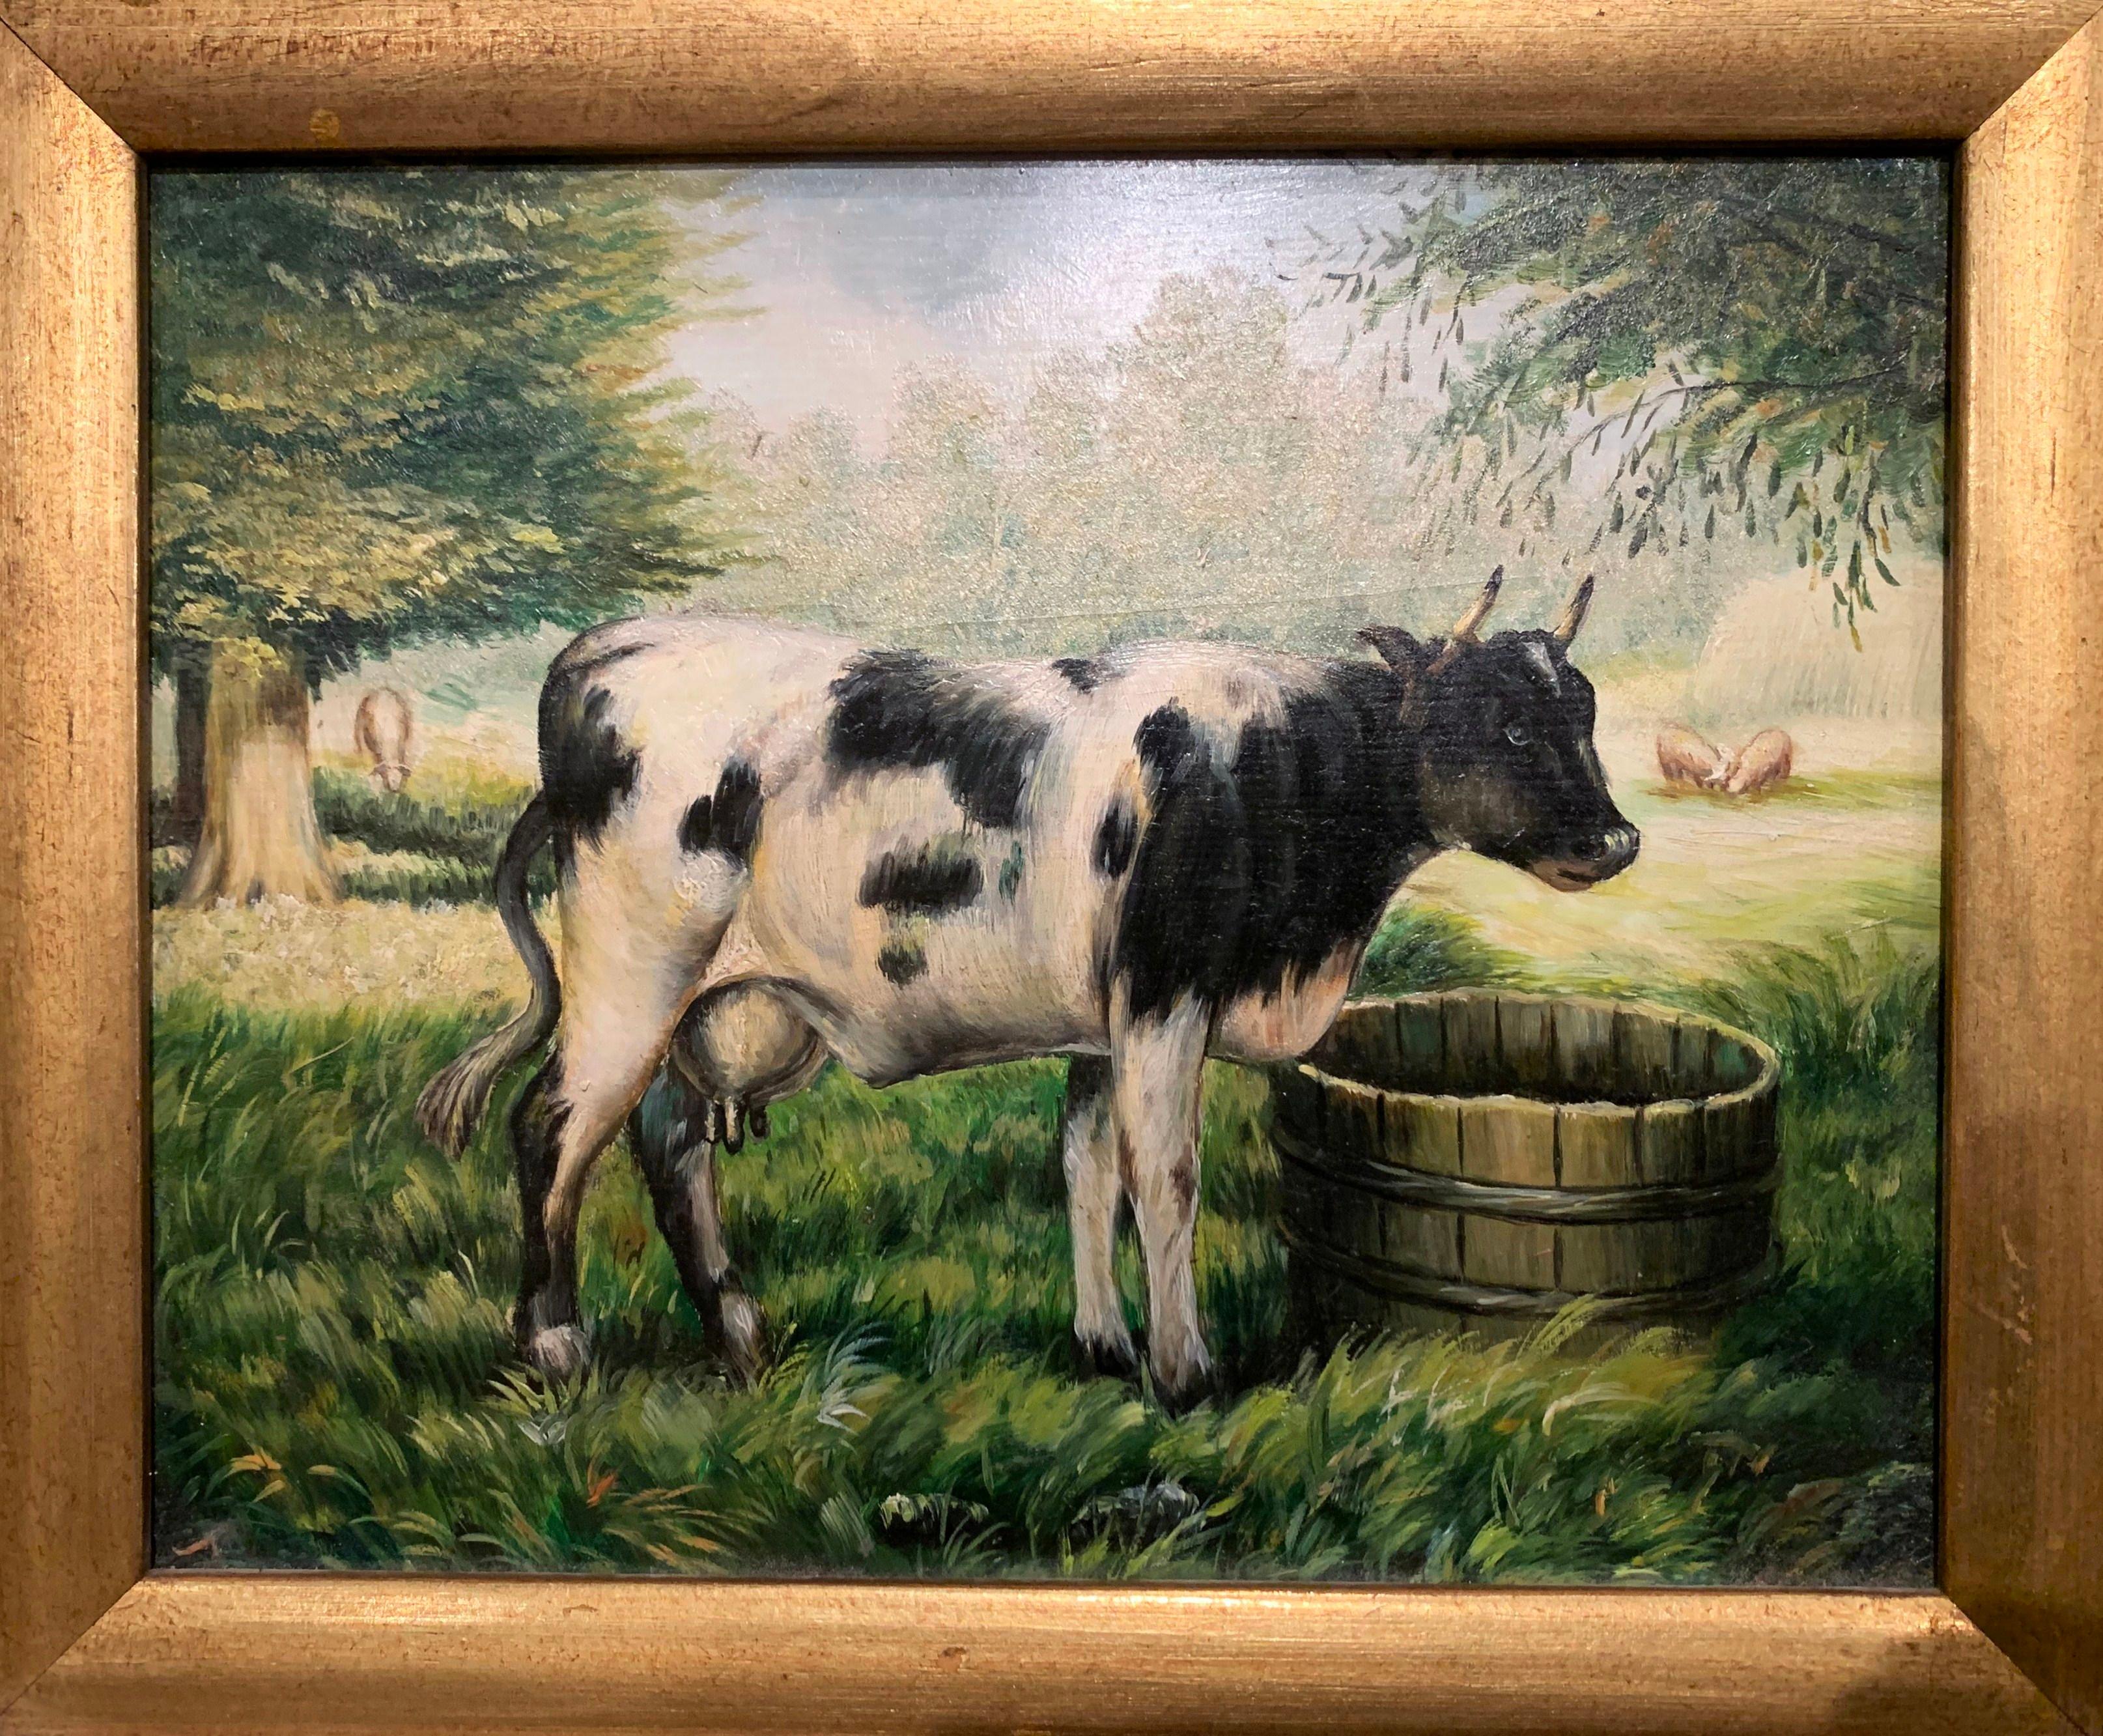 Decorate a wall this this elegant and colorful cow painting. Crafted in France circa 1980, and set in the original carved gilt wood frame, the art work is painted on board and features a cow in the pasture next to a wood barrel trough with trees in